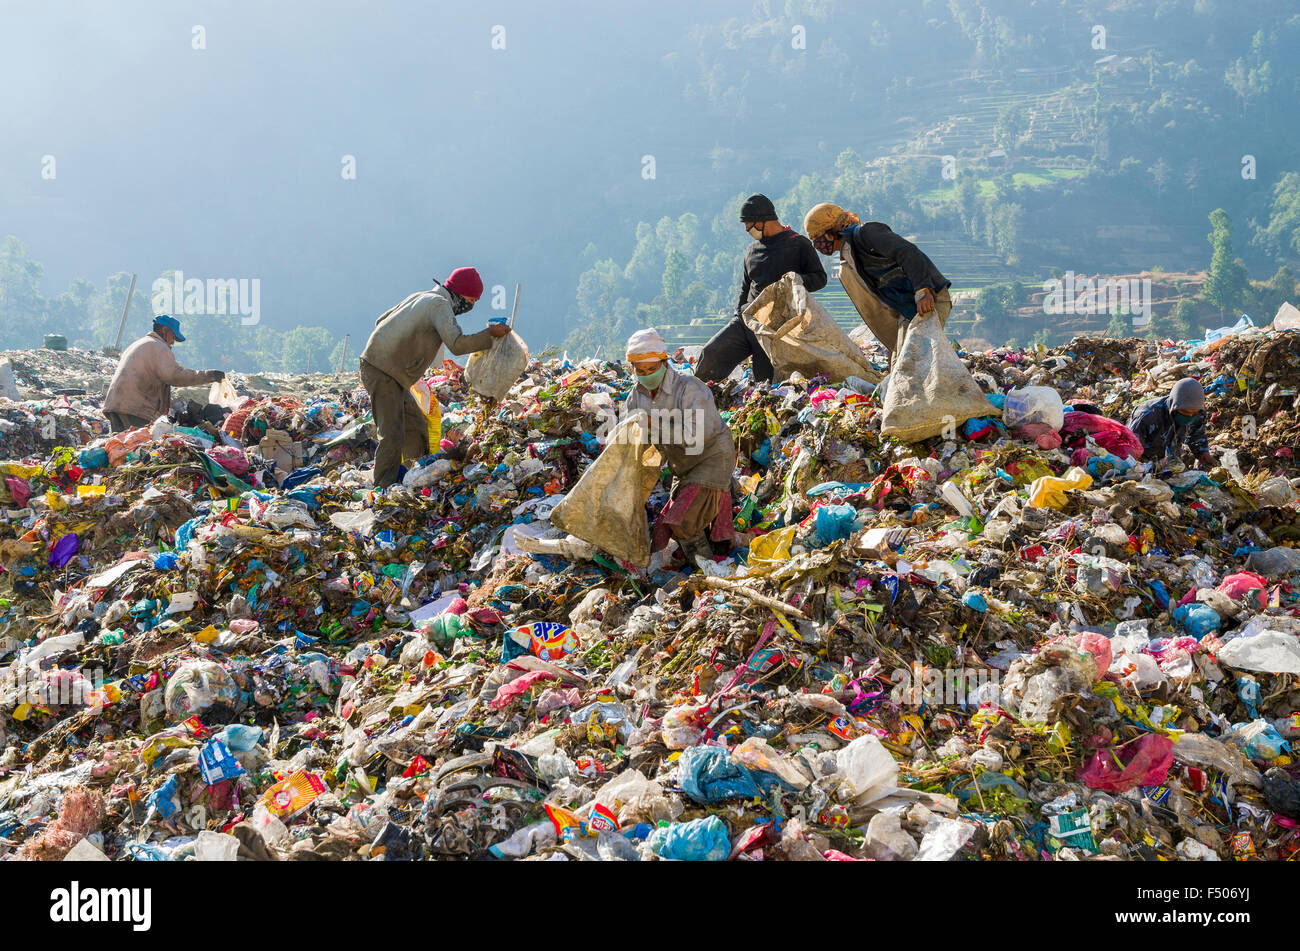 Workers sorting out garbage at Aletar garbage dump, earning 300-400 nepali rupees a day Stock Photo